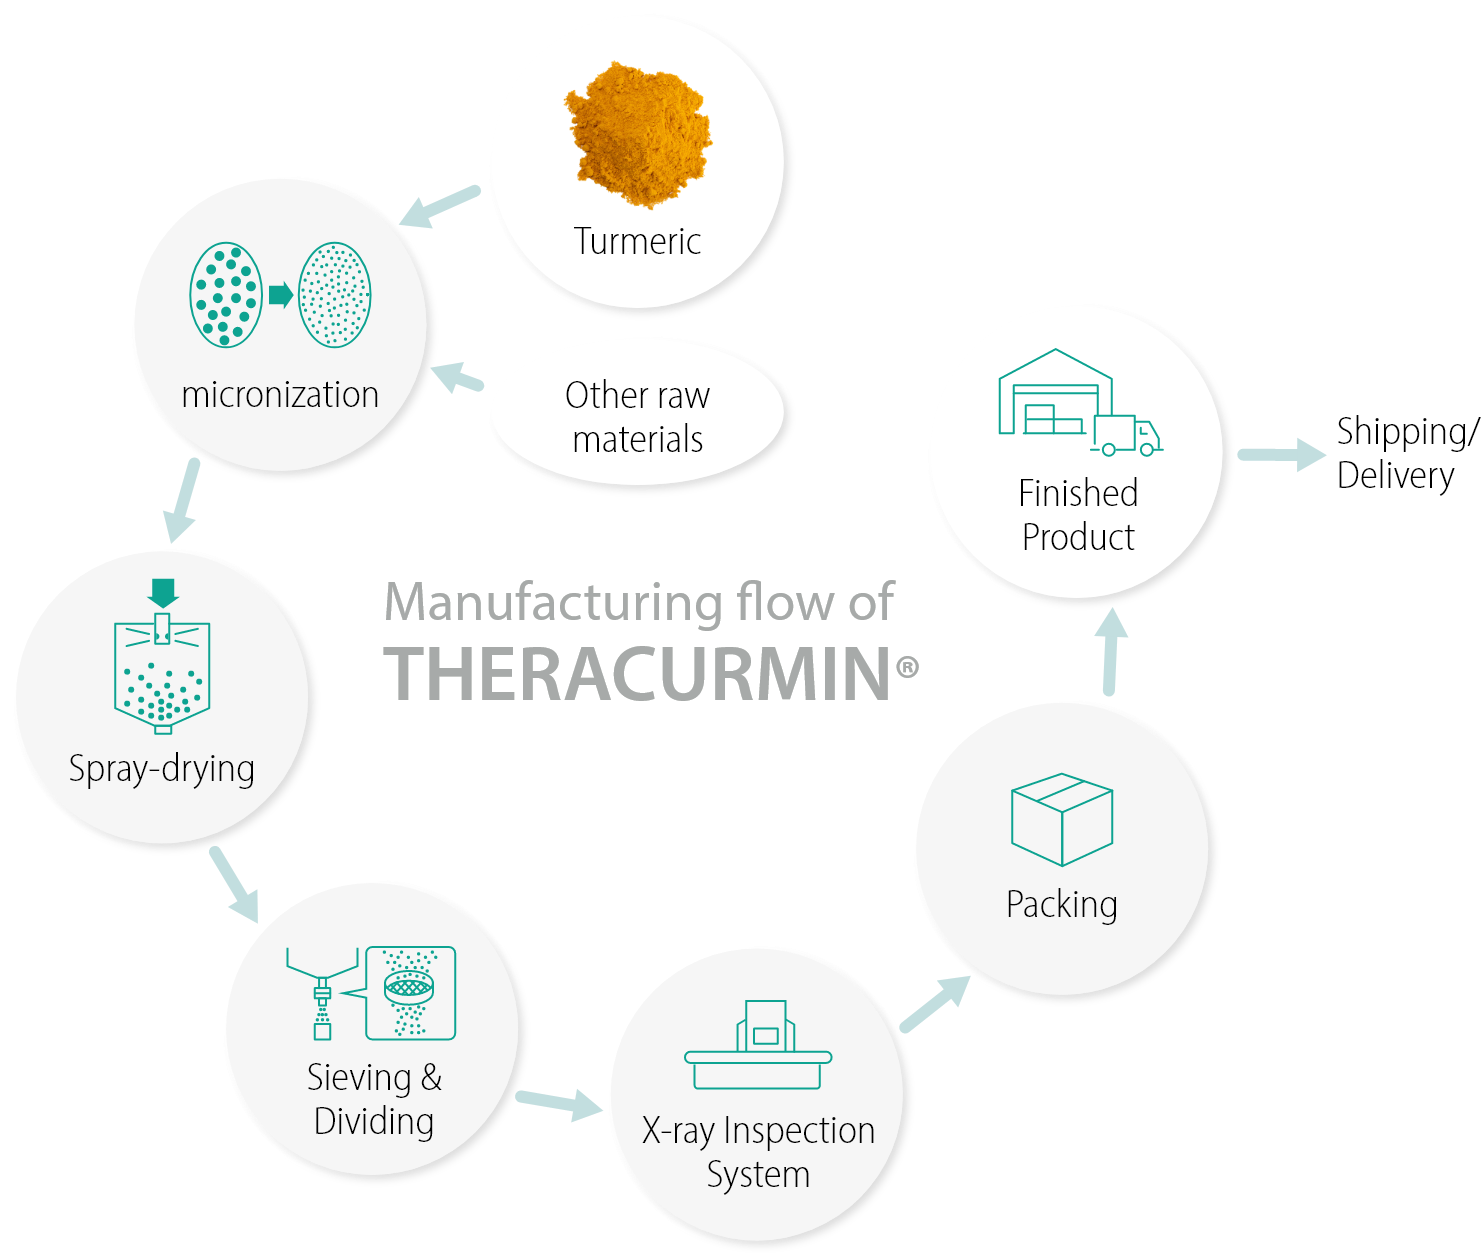 Manufacturing flow of THERACURMIN®